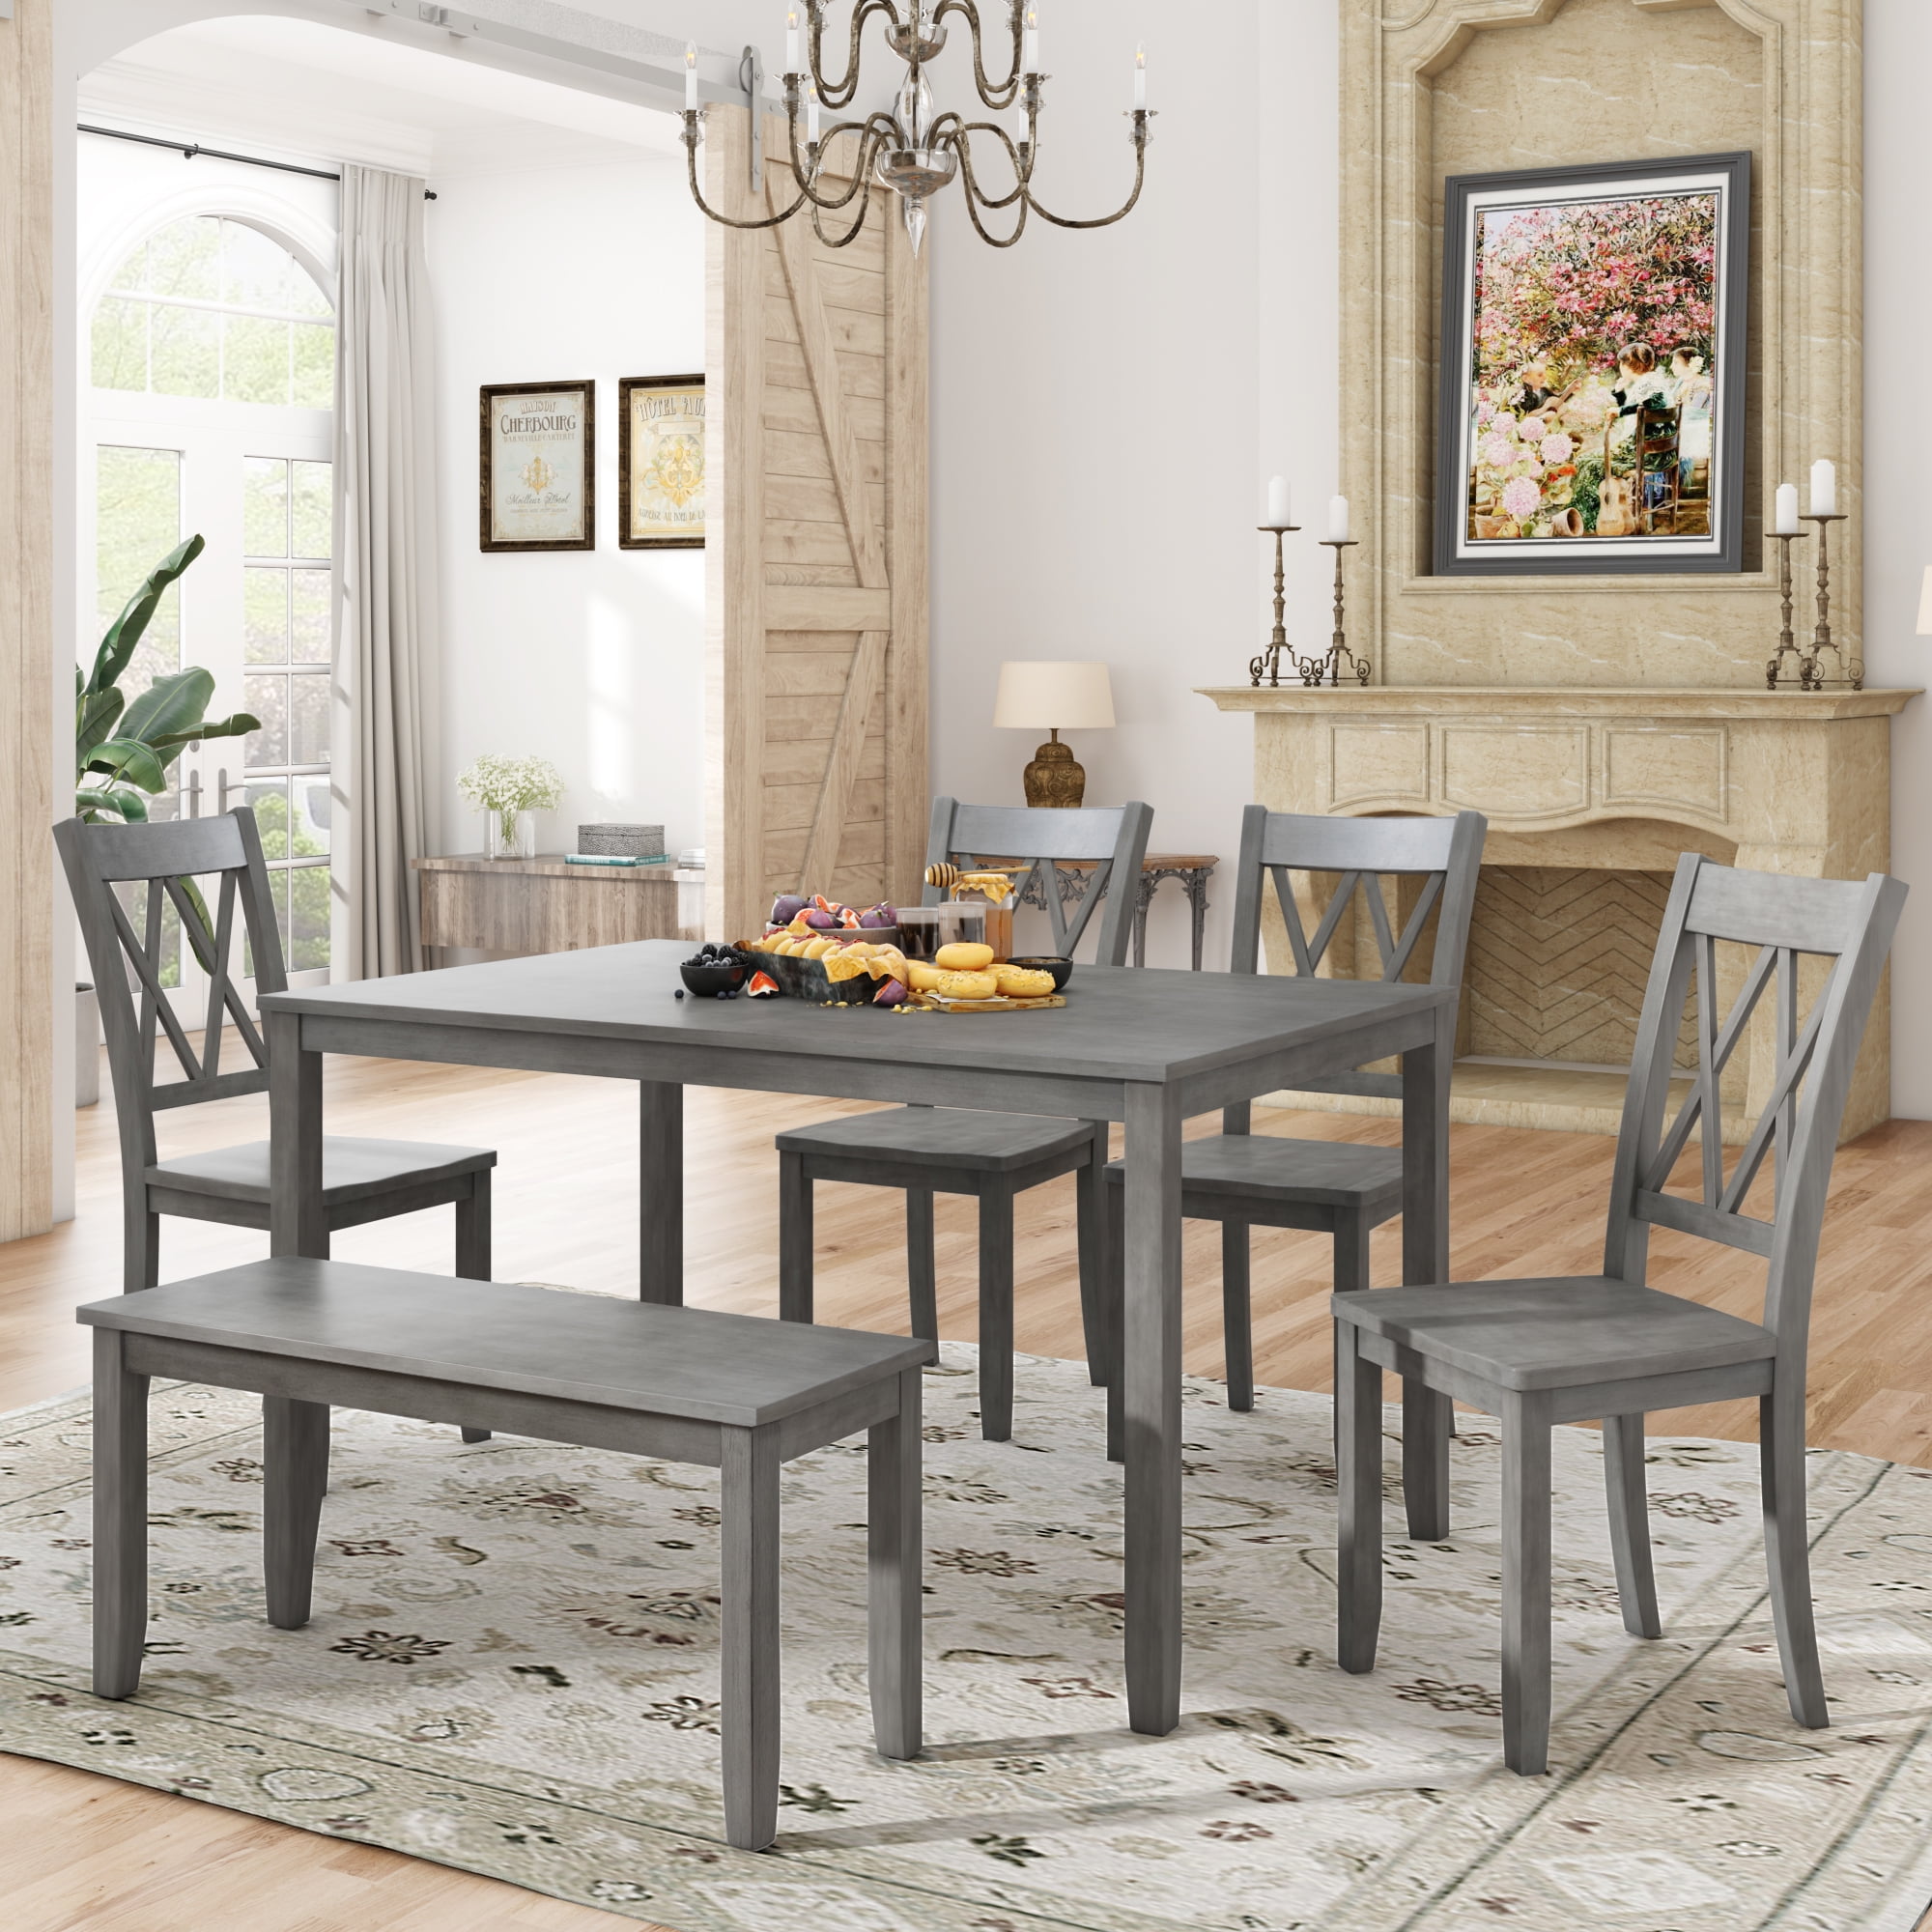 Enyopro 6 Piece Dining Table Set, Dining Room Table Bench And Chairs Set